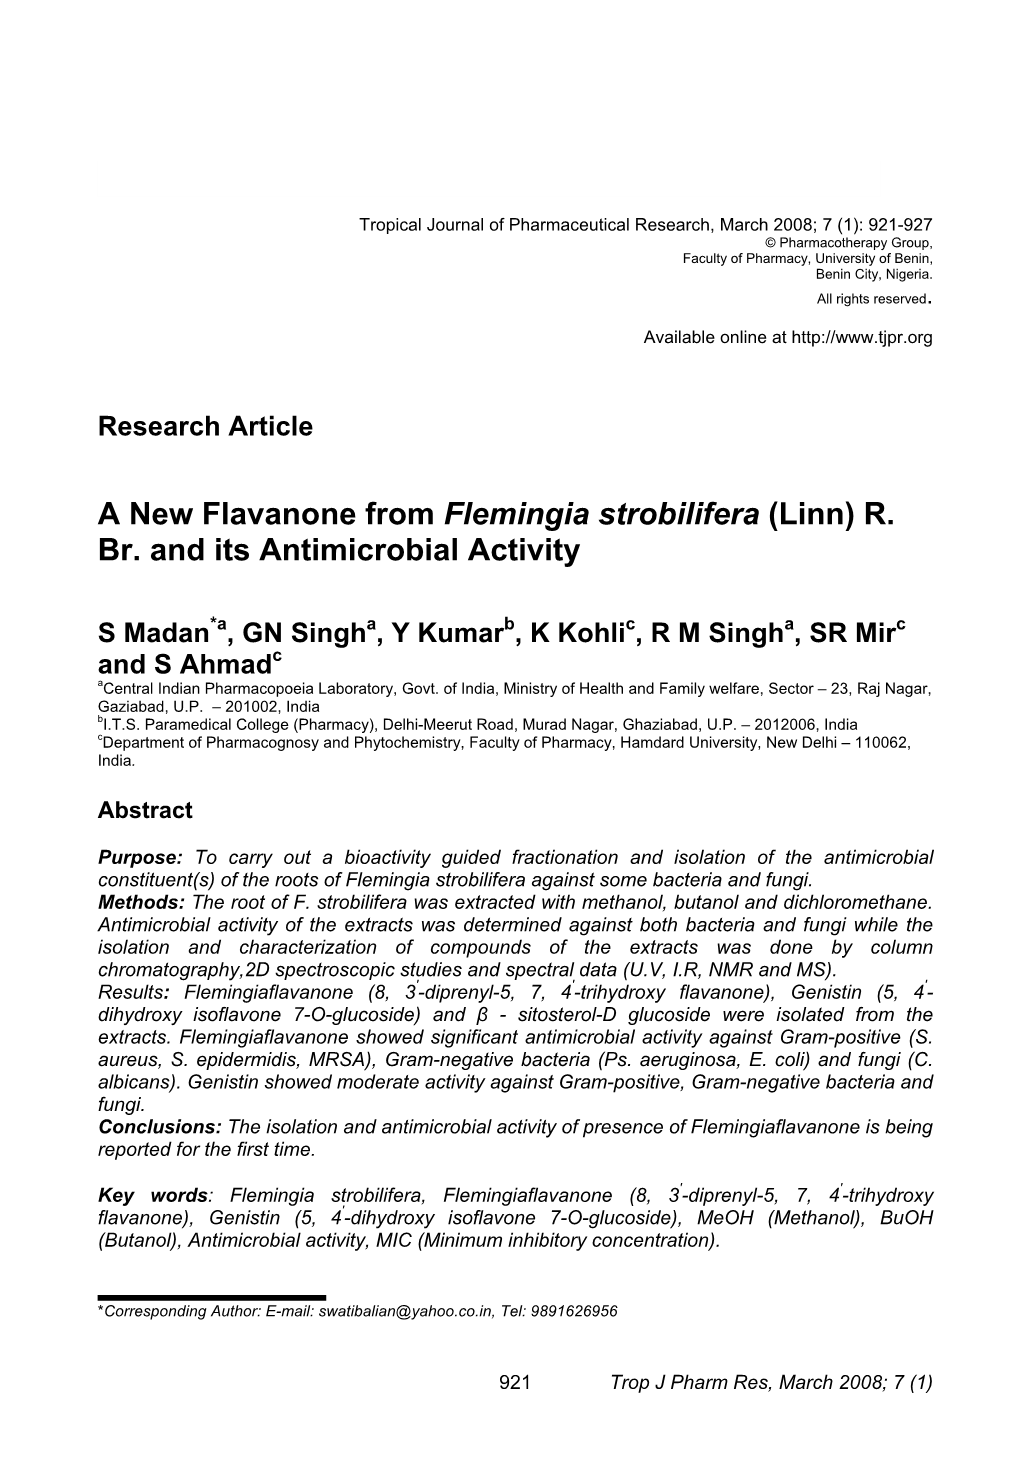 A New Flavanone from Flemingia Strobilifera (Linn) R. Br. and Its Antimicrobial Activity